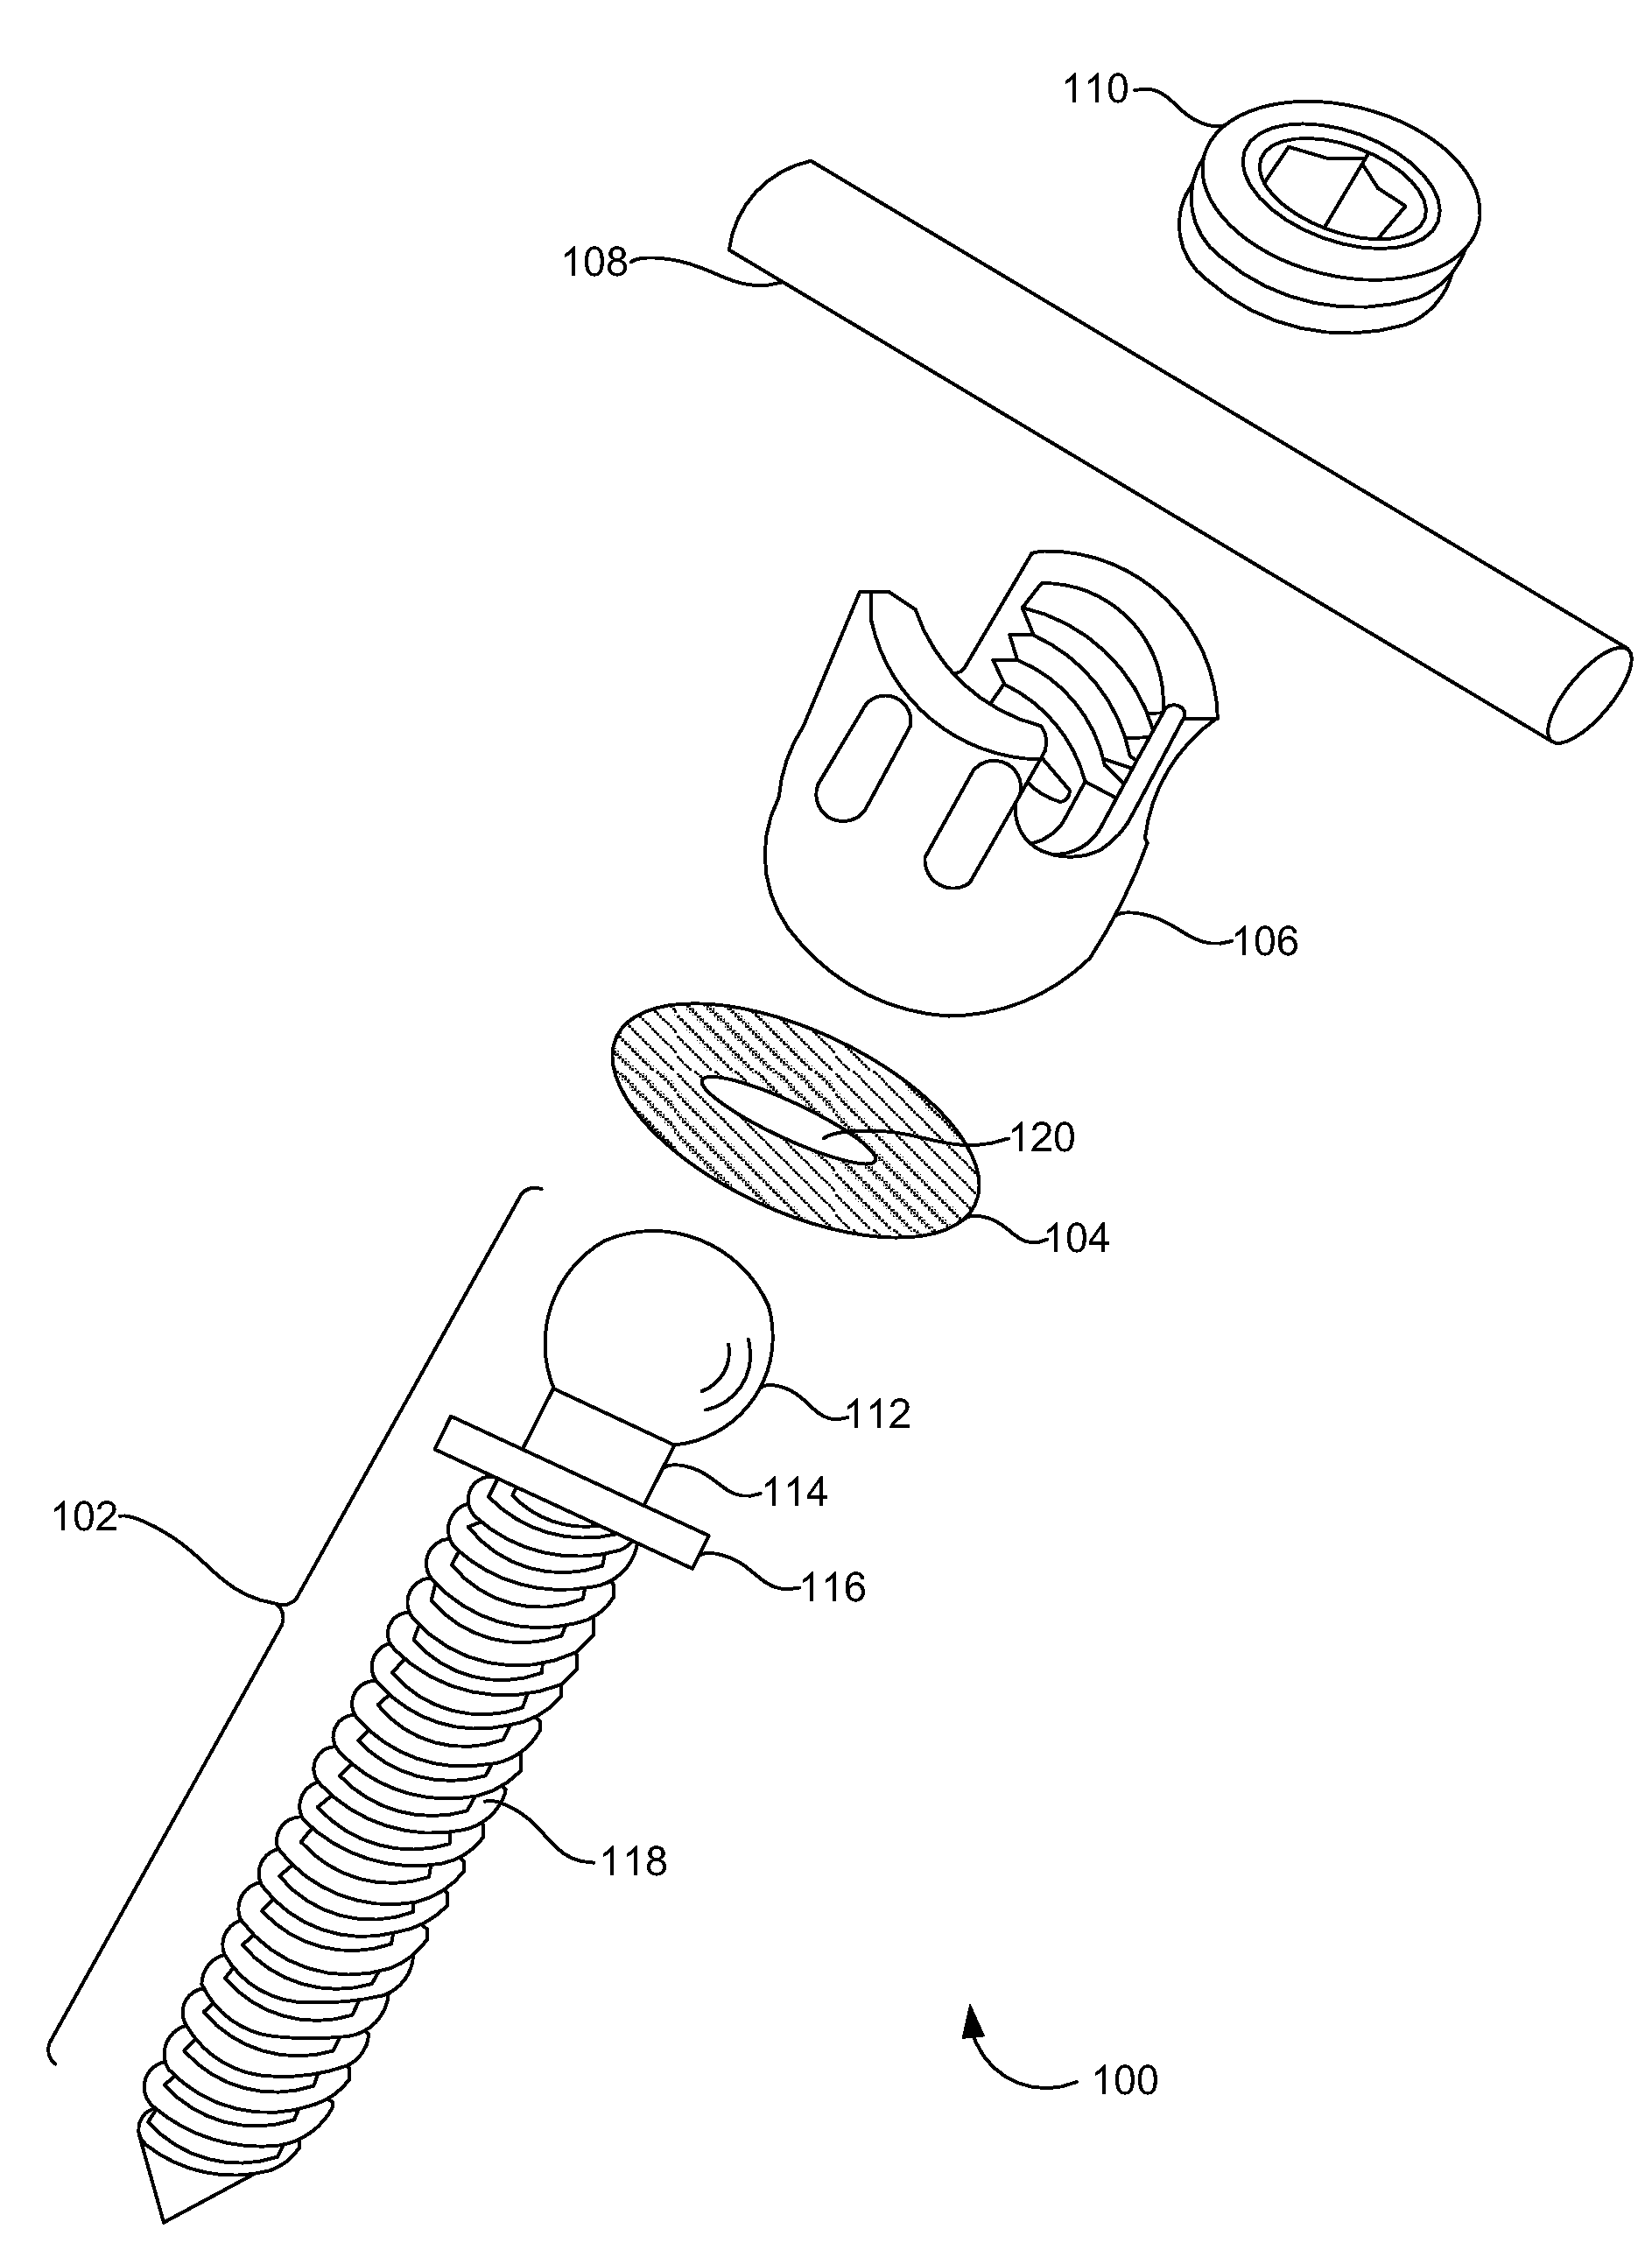 Spring-loaded dynamic pedicle screw assembly